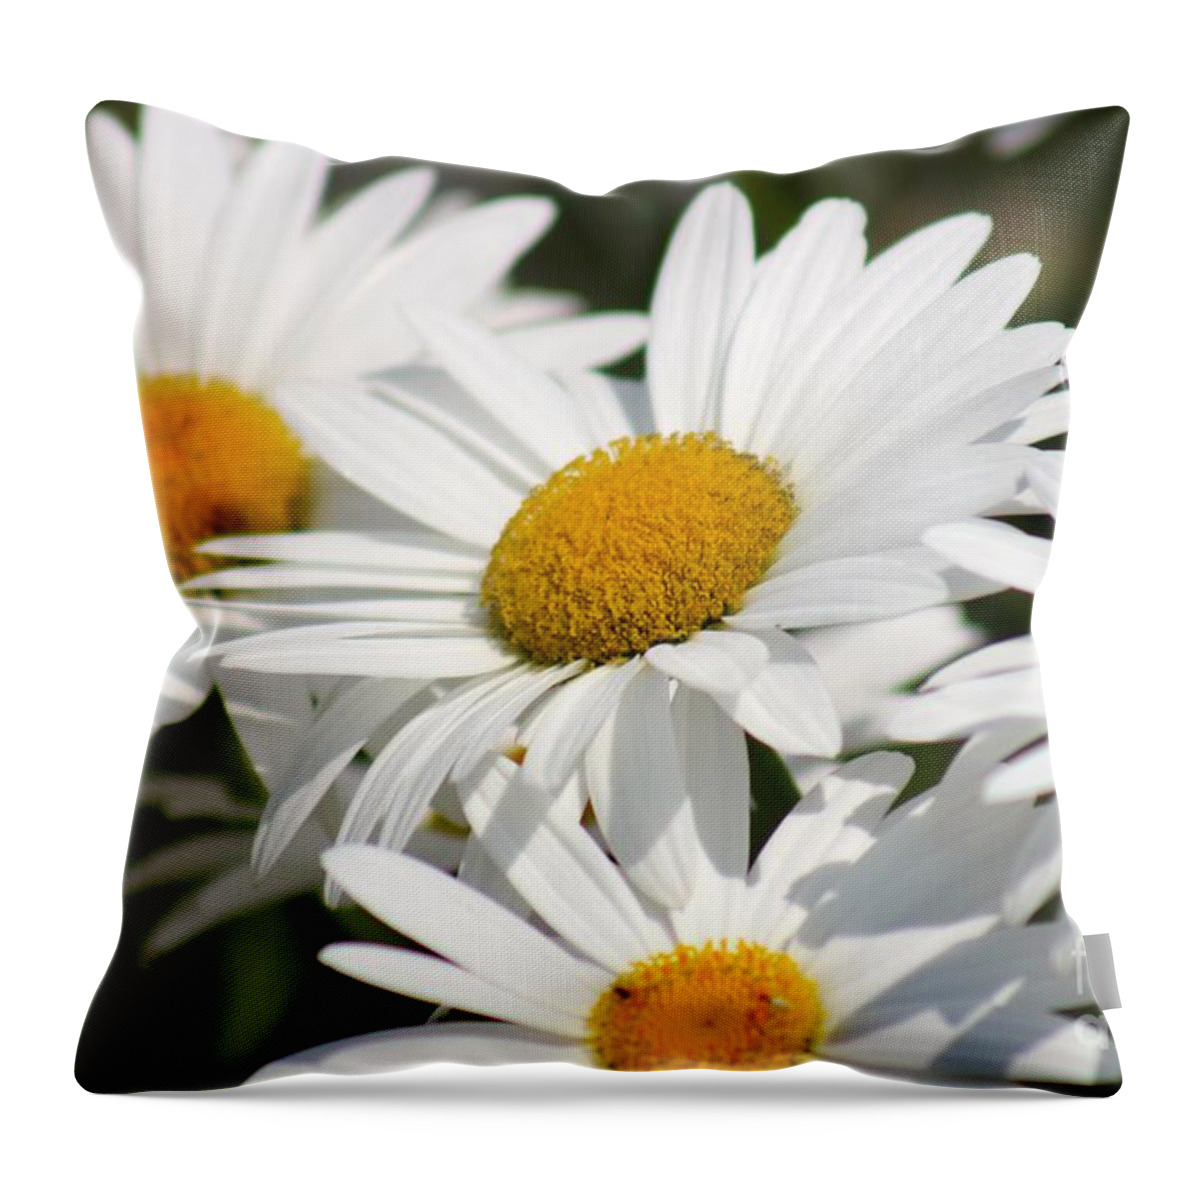 Yellow Throw Pillow featuring the photograph Nature's Beauty 60 by Deena Withycombe